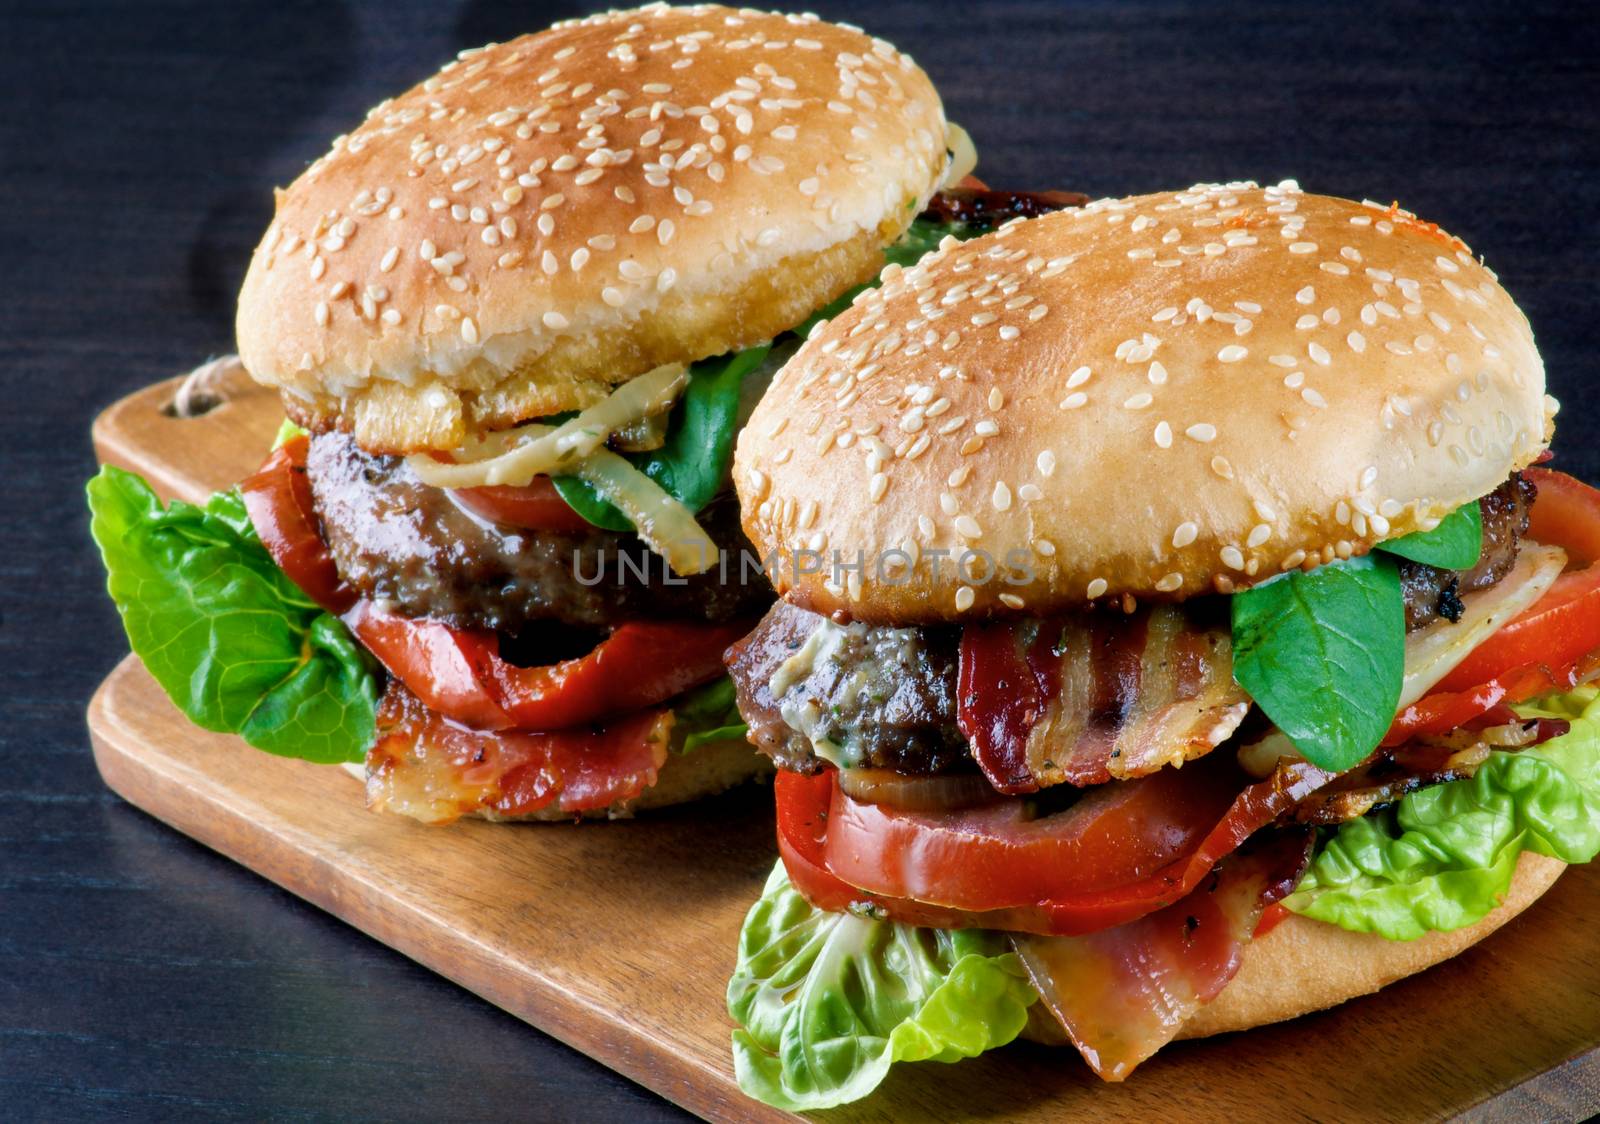 Tasty Hamburgers with Beef, Bacon, Lettuce, Tomatoes, Roasted Onion and Juicy Sauce on Sesame Buns on Wooden Cutting Board closeup on Dark background